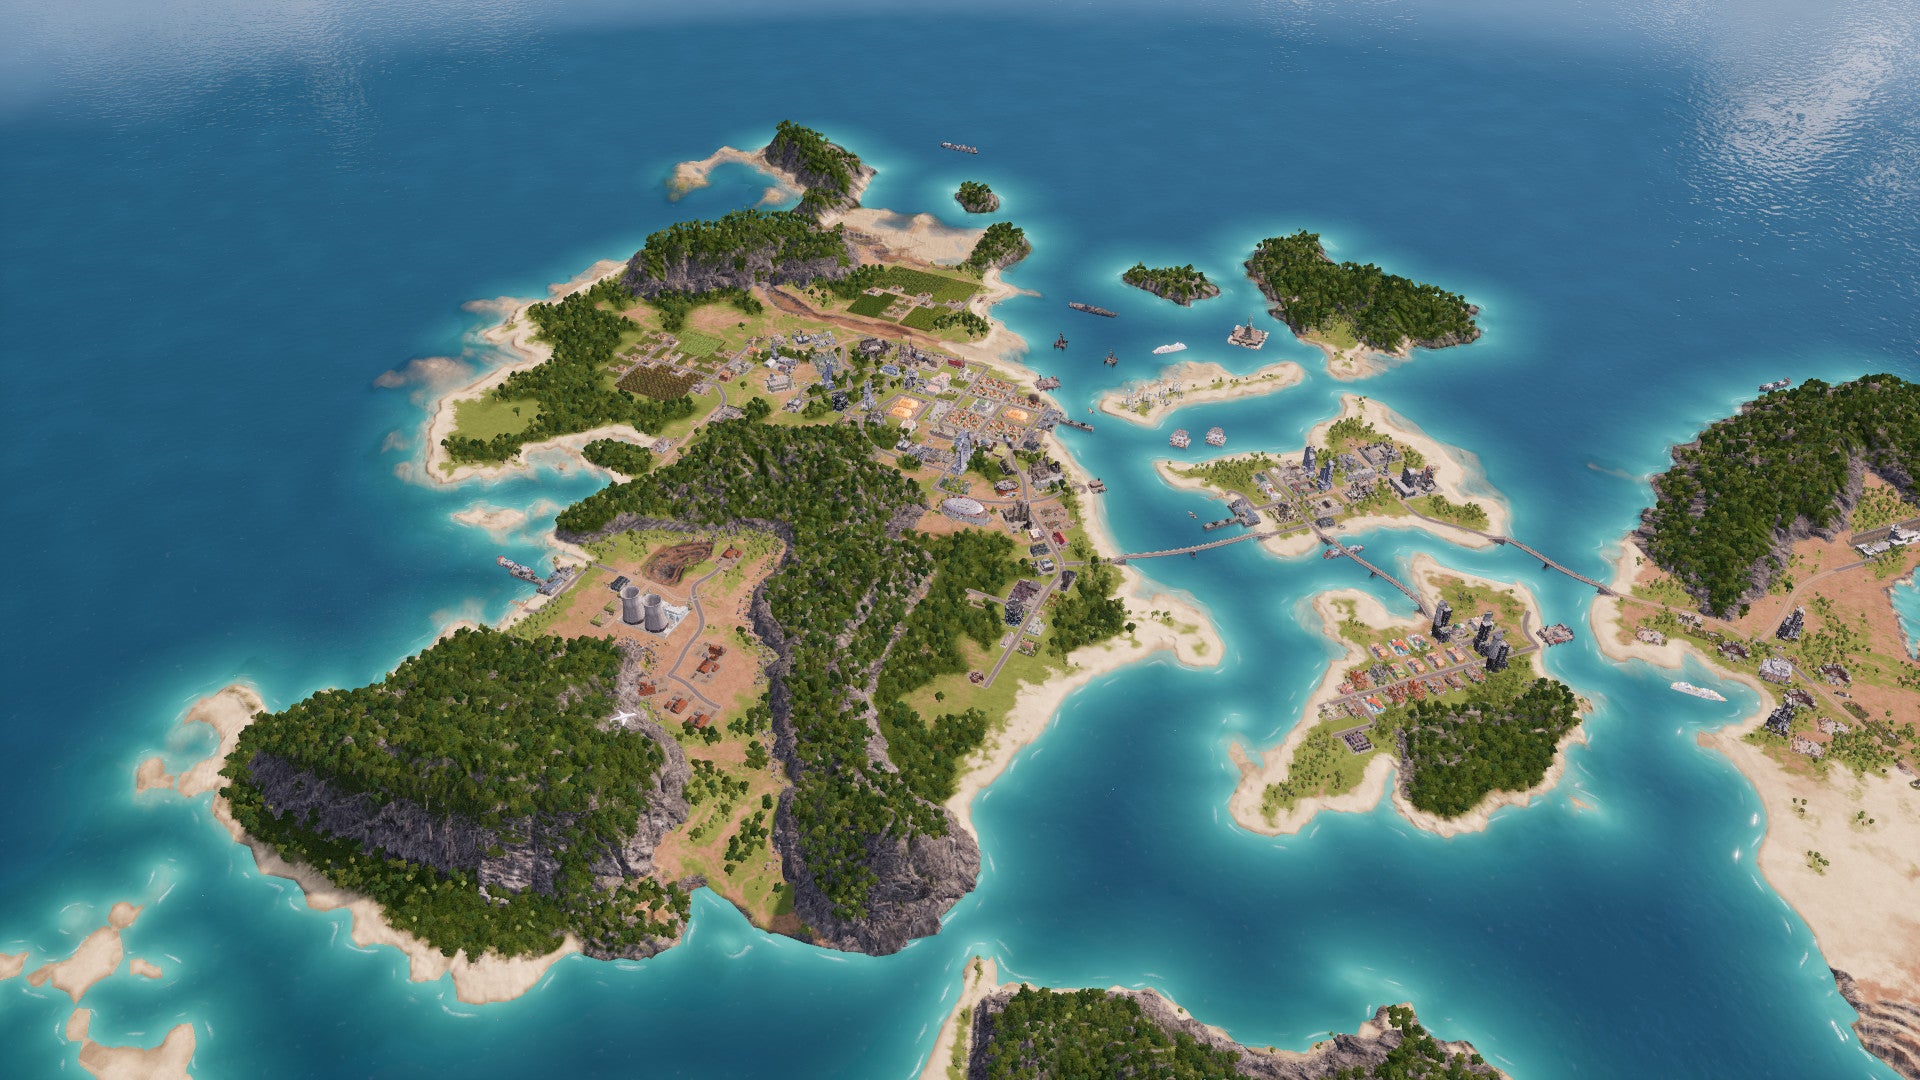 Image for Sample sun, sand, and strategy in Tropico 6's open beta